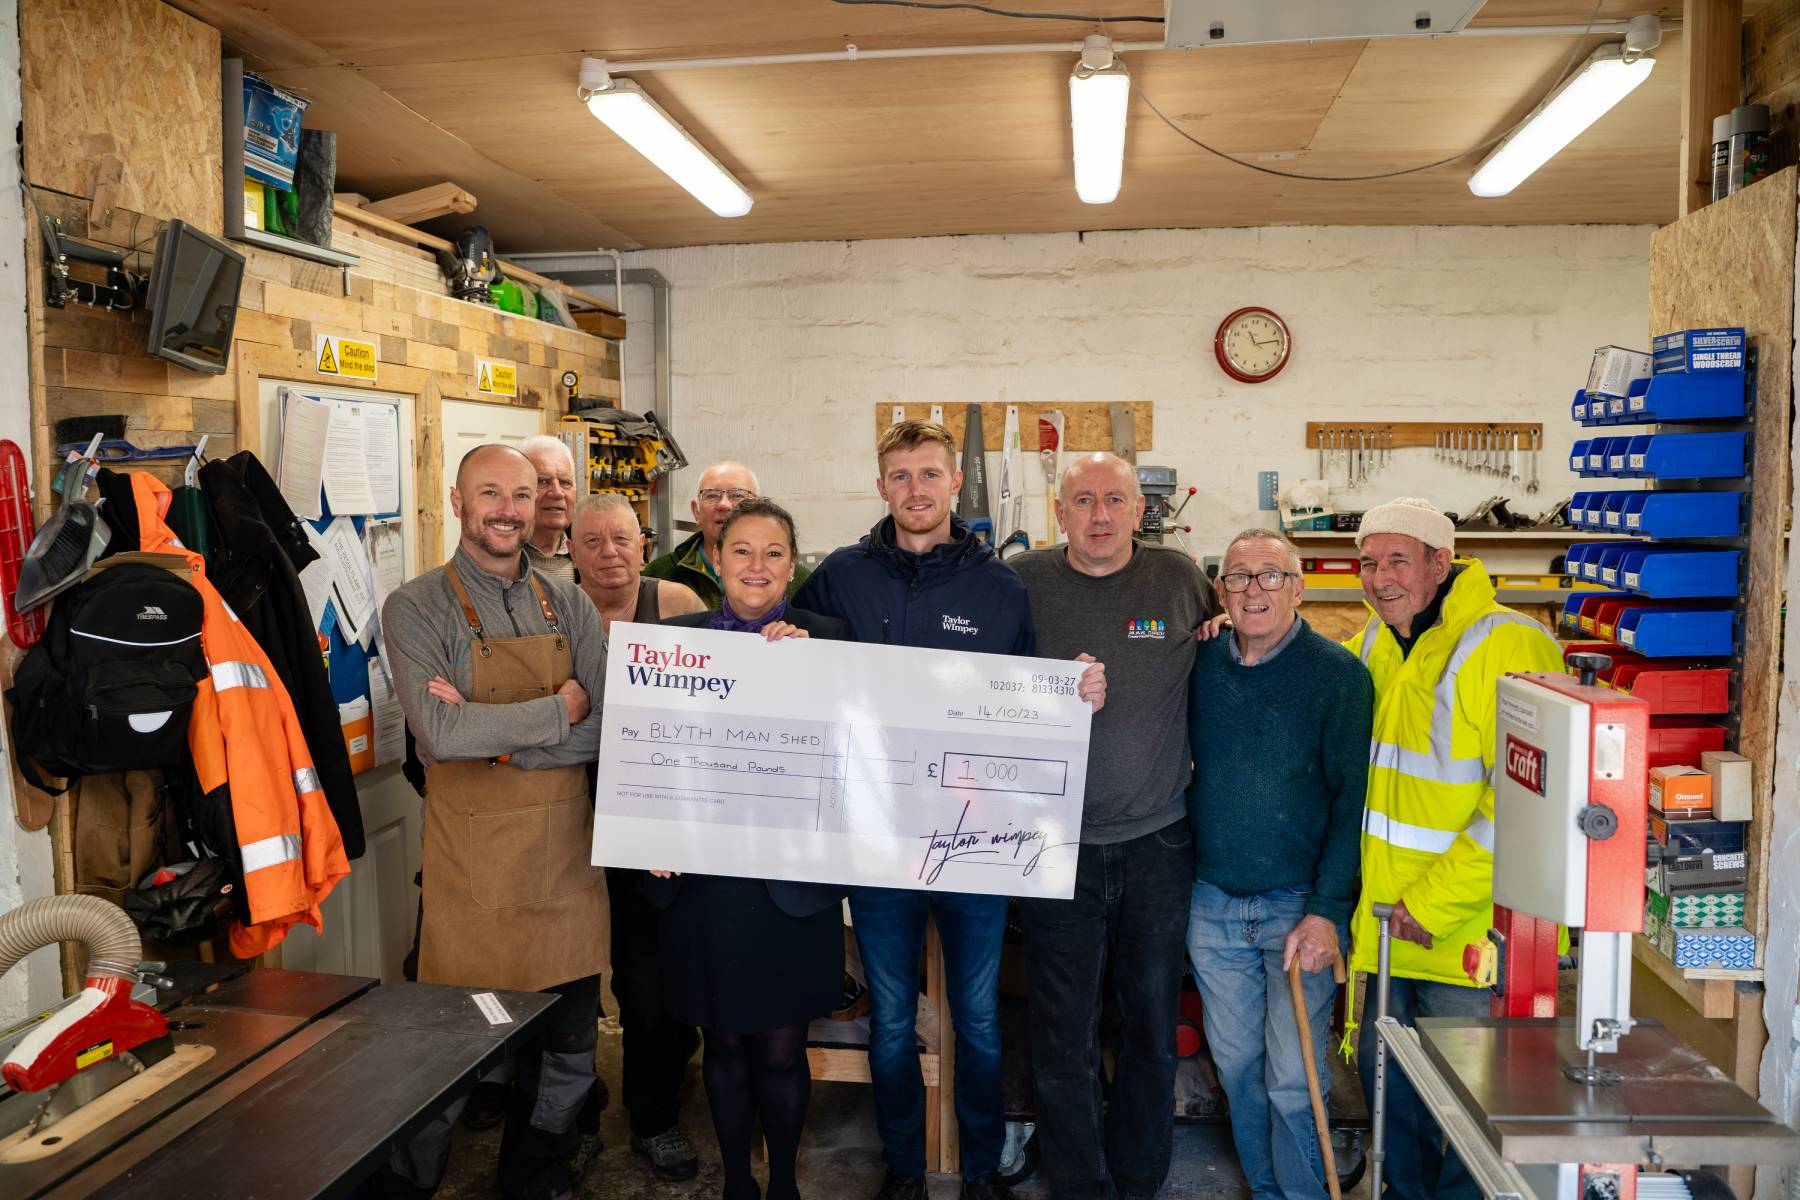 Taylor Wimpey supports Blyth Man Shed